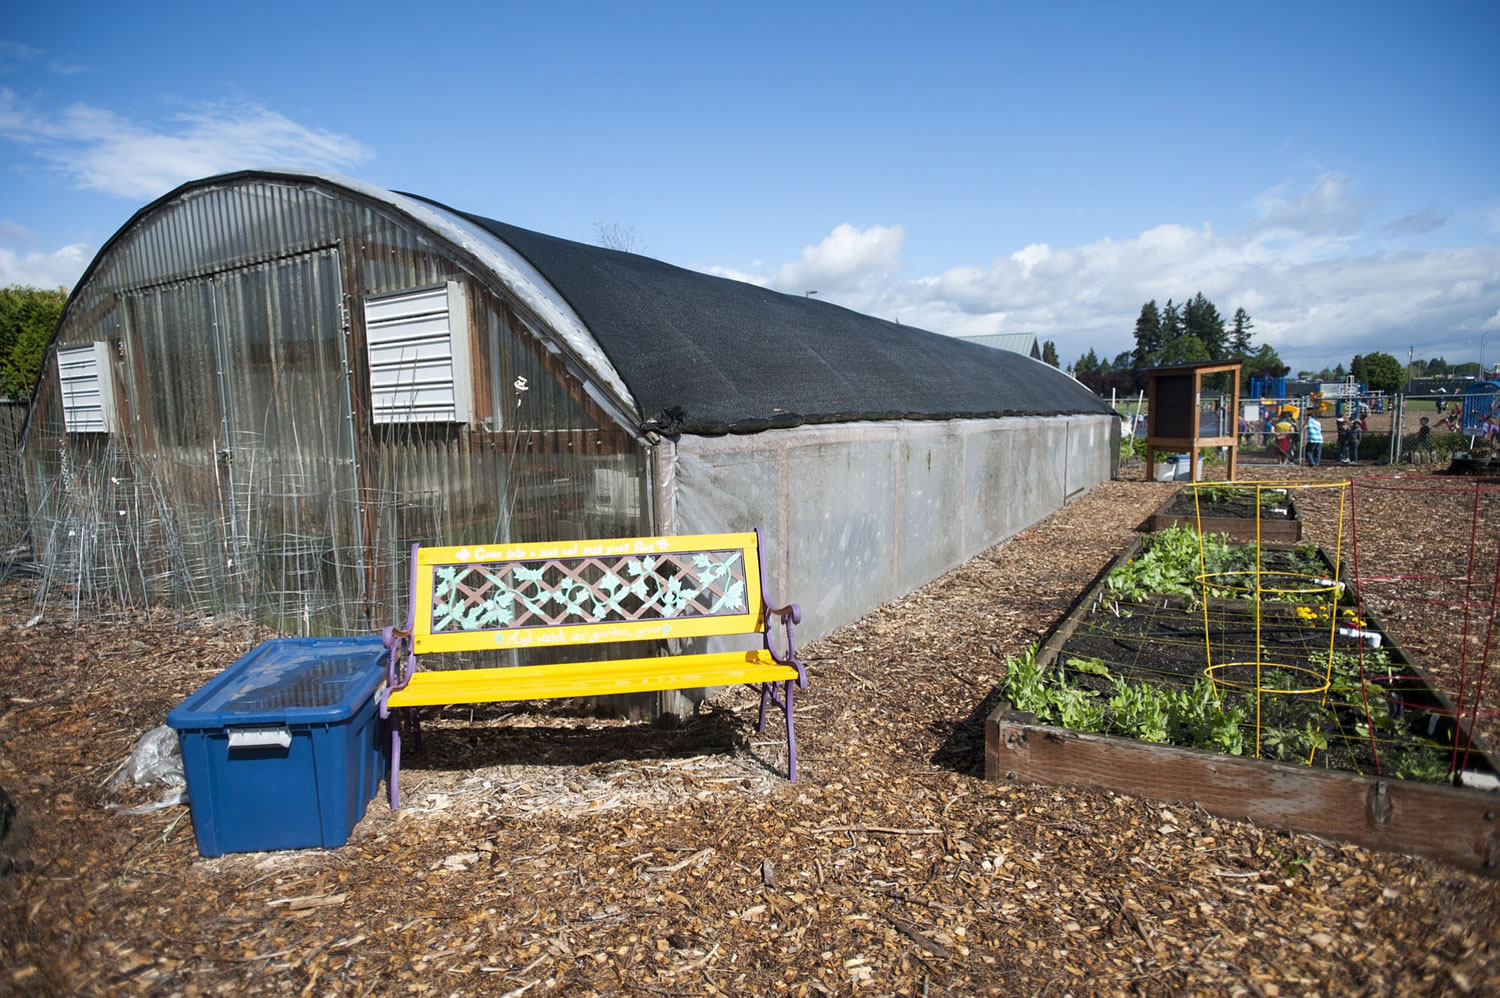 There are 25 raised beds at the Hazel Dell School and Community Garden. Clark College and Washington State University Extension master gardeners use the site to teach kids about gardening.